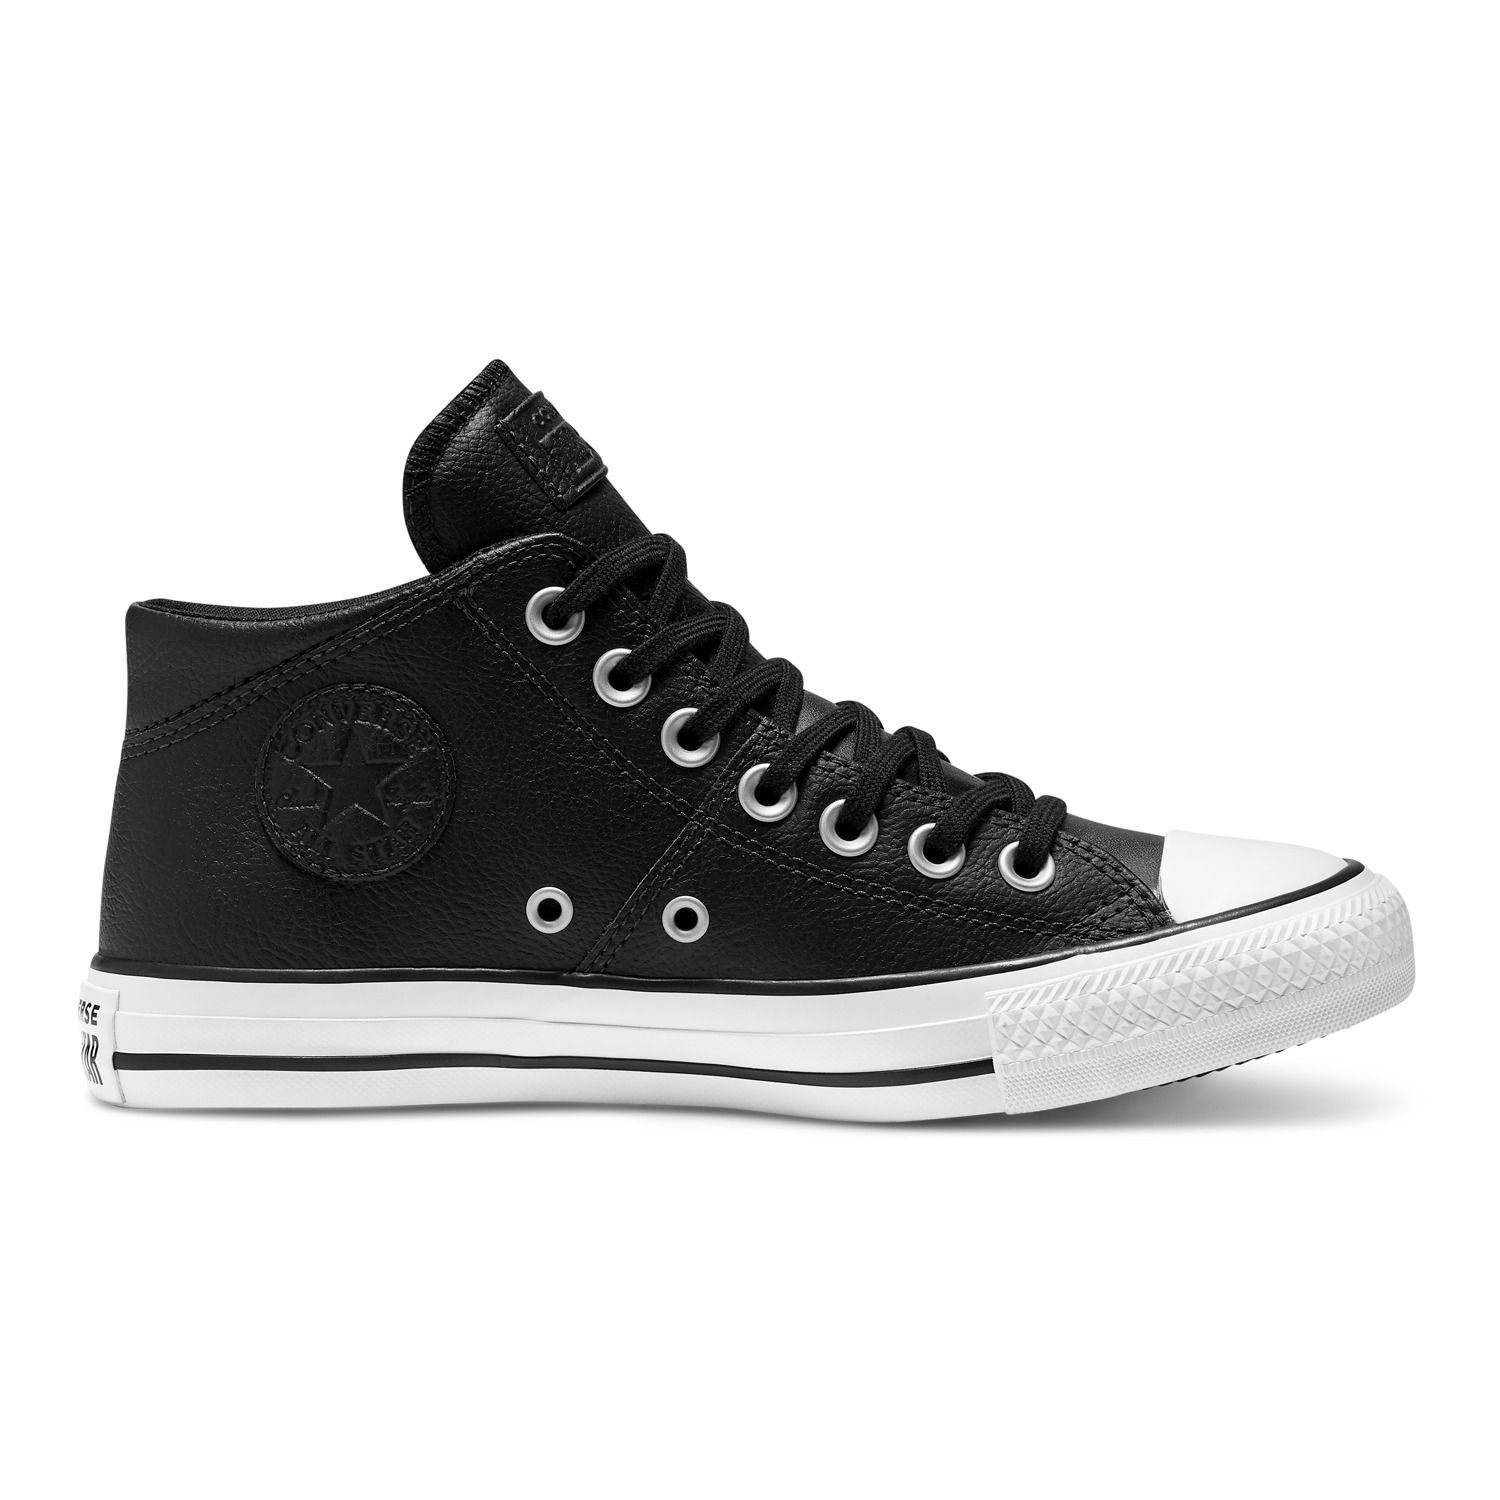 converse madison mid women's sneakers